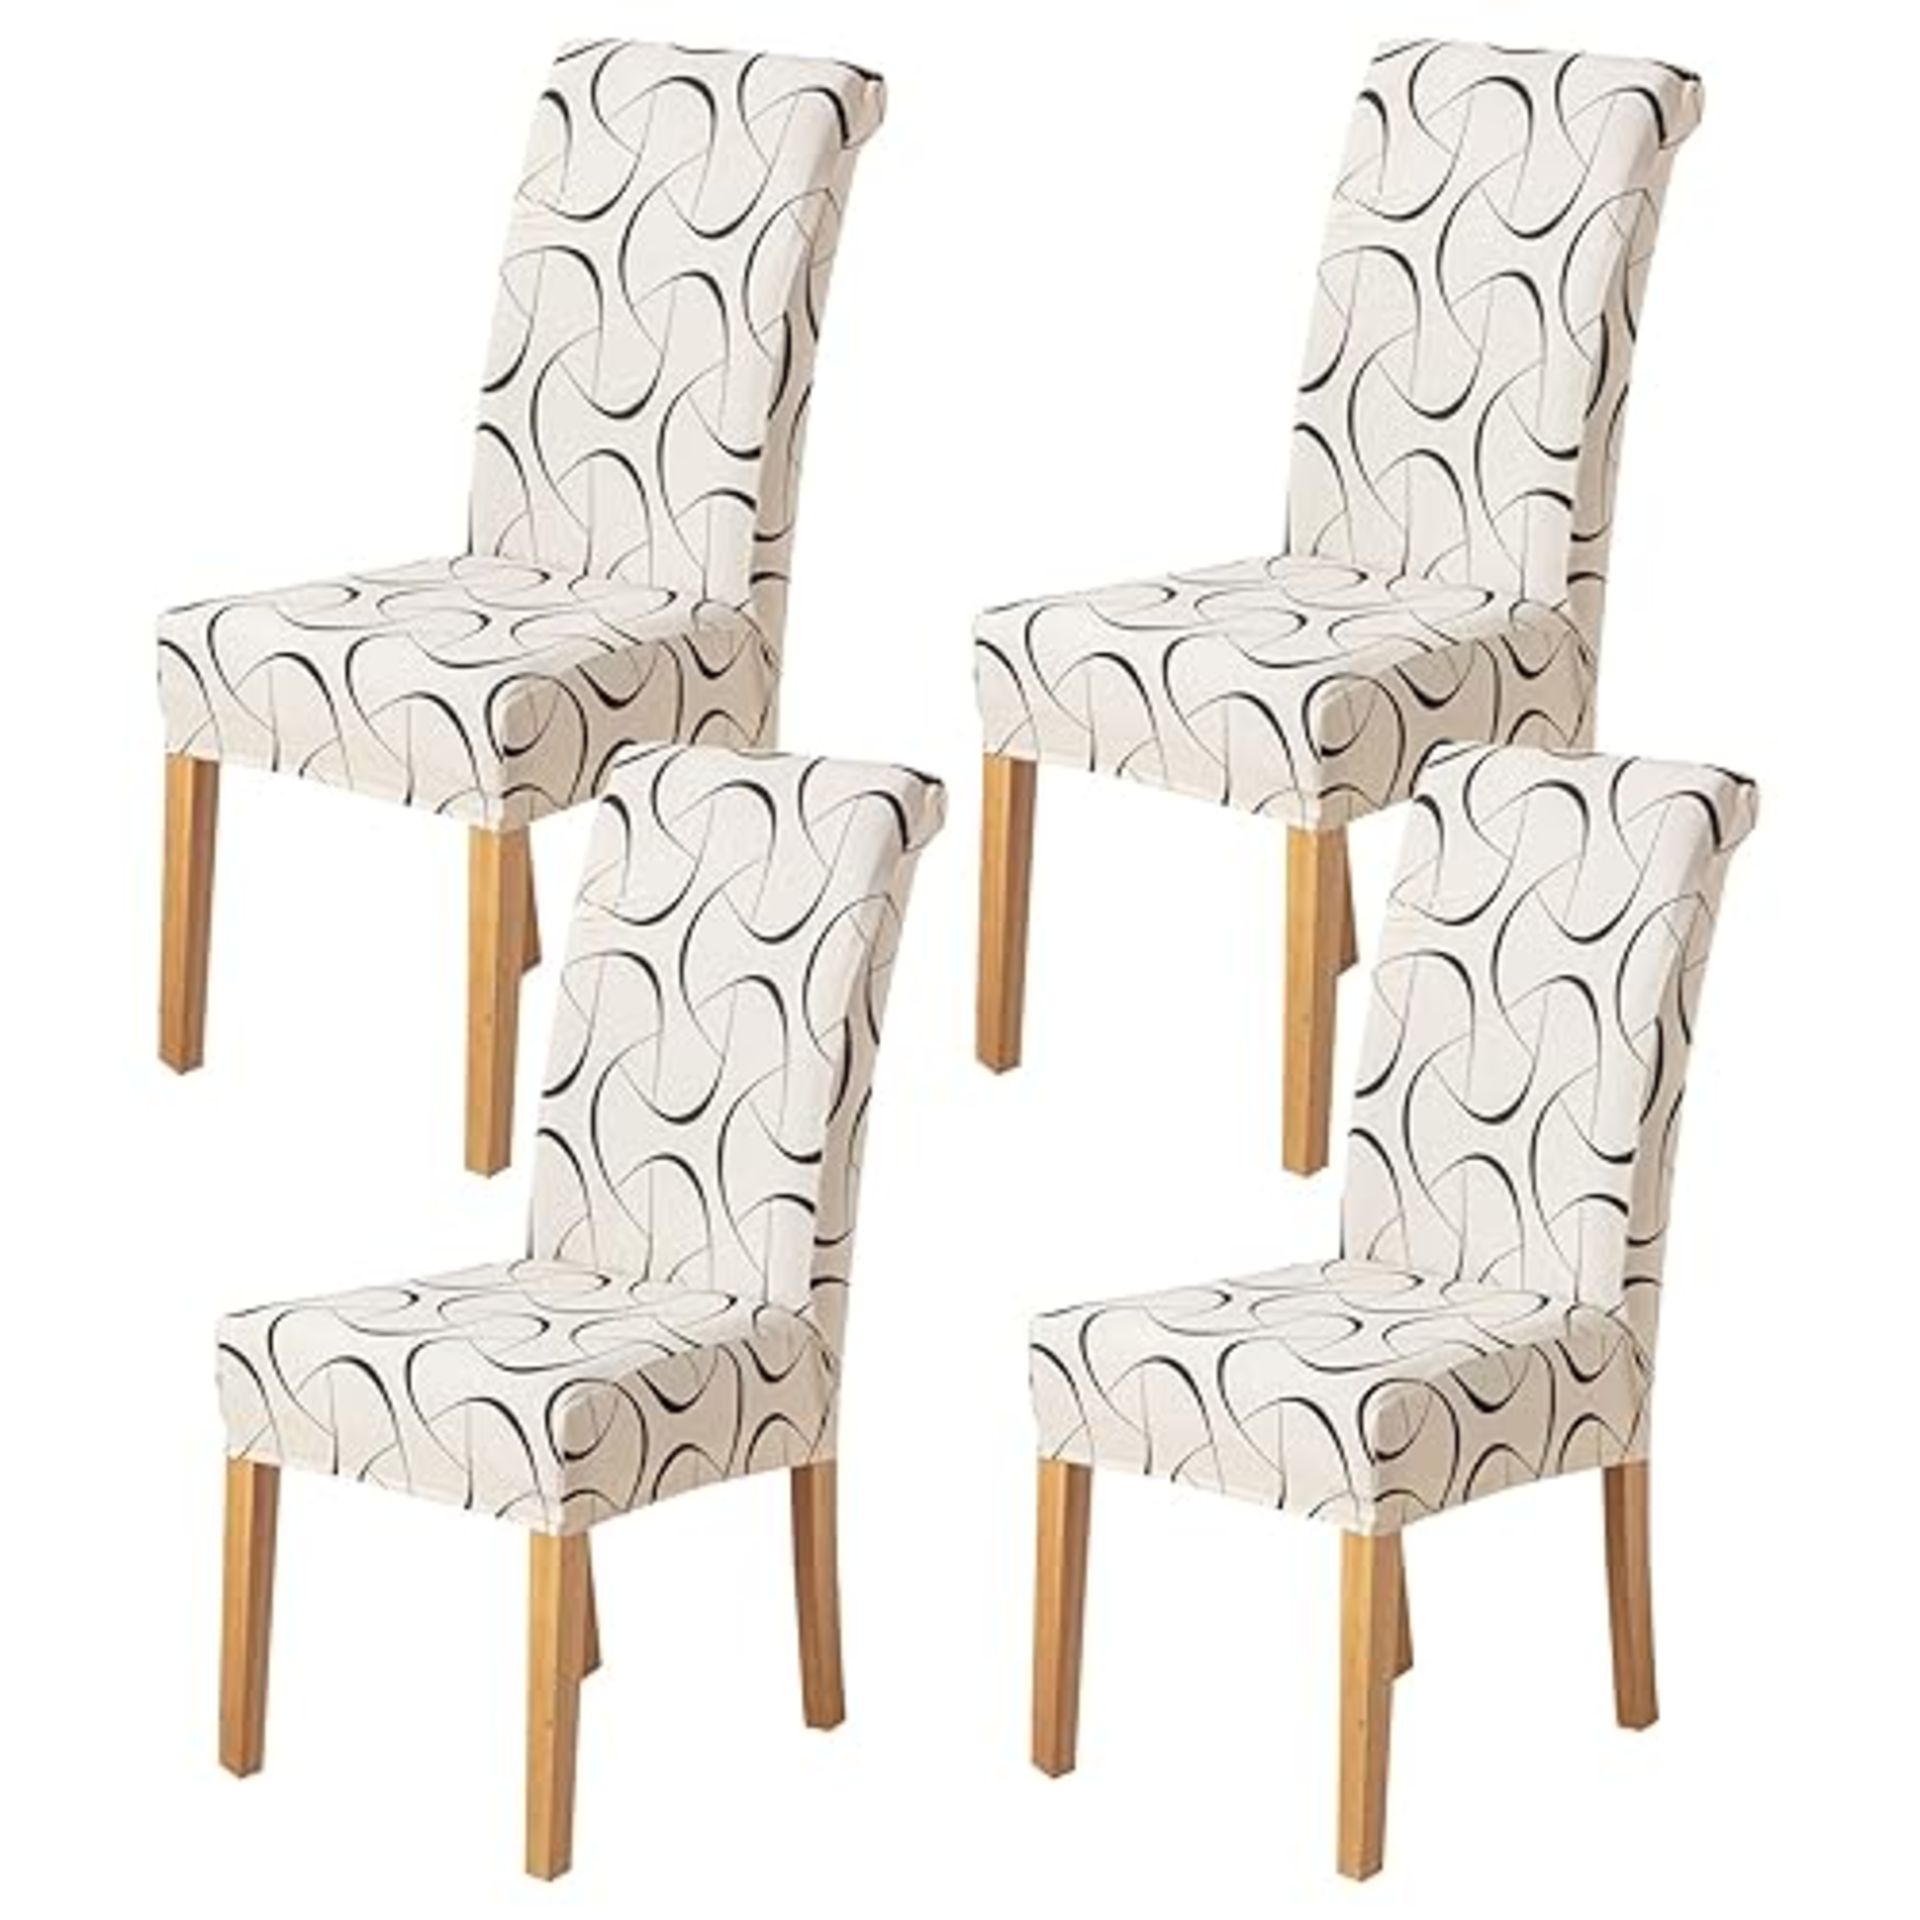 HZDHCLH Chair Covers Slipcovers 4/6 PCs Stretch Removable Washable Short Dining Chair Protector Cov